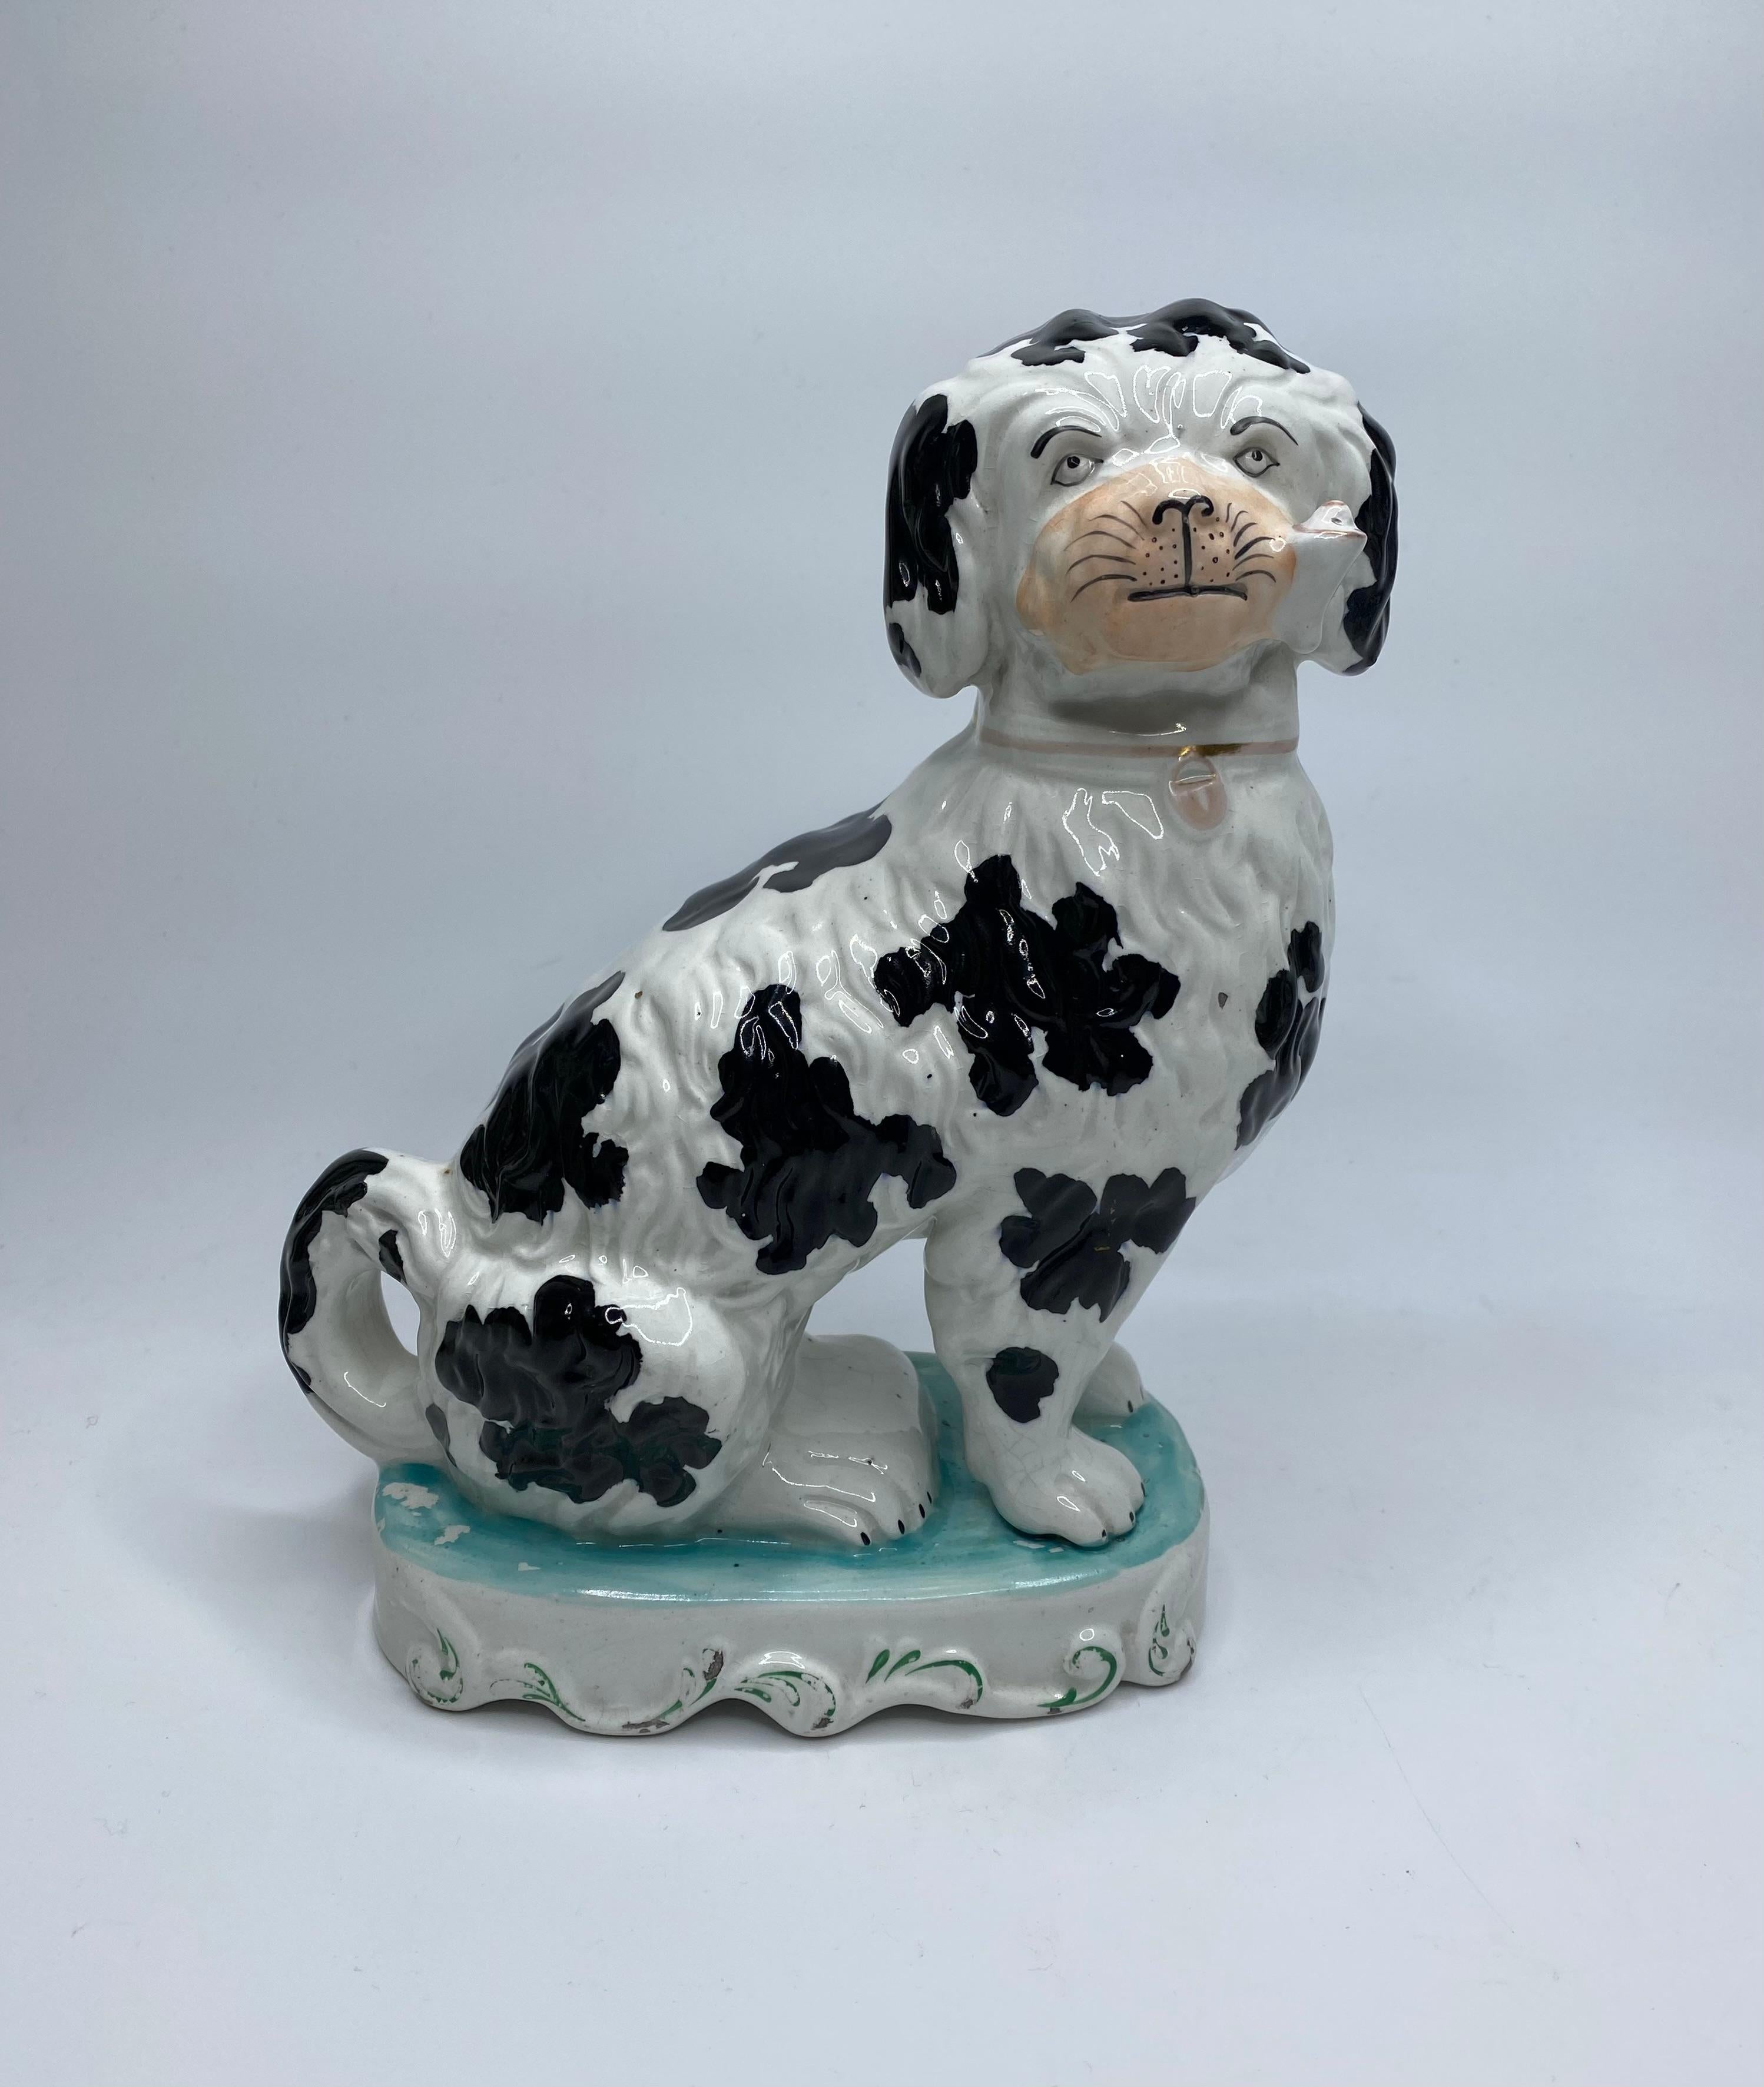 A rare pair of Staffordshire Pipe Smoking dogs, c. 1850.
The finely modelled seated dogs having separate front legs, and curled tails, whilst they puff on tobacco filled pipes. The deeply moulded fur, enhanced with underglaze black spots, and